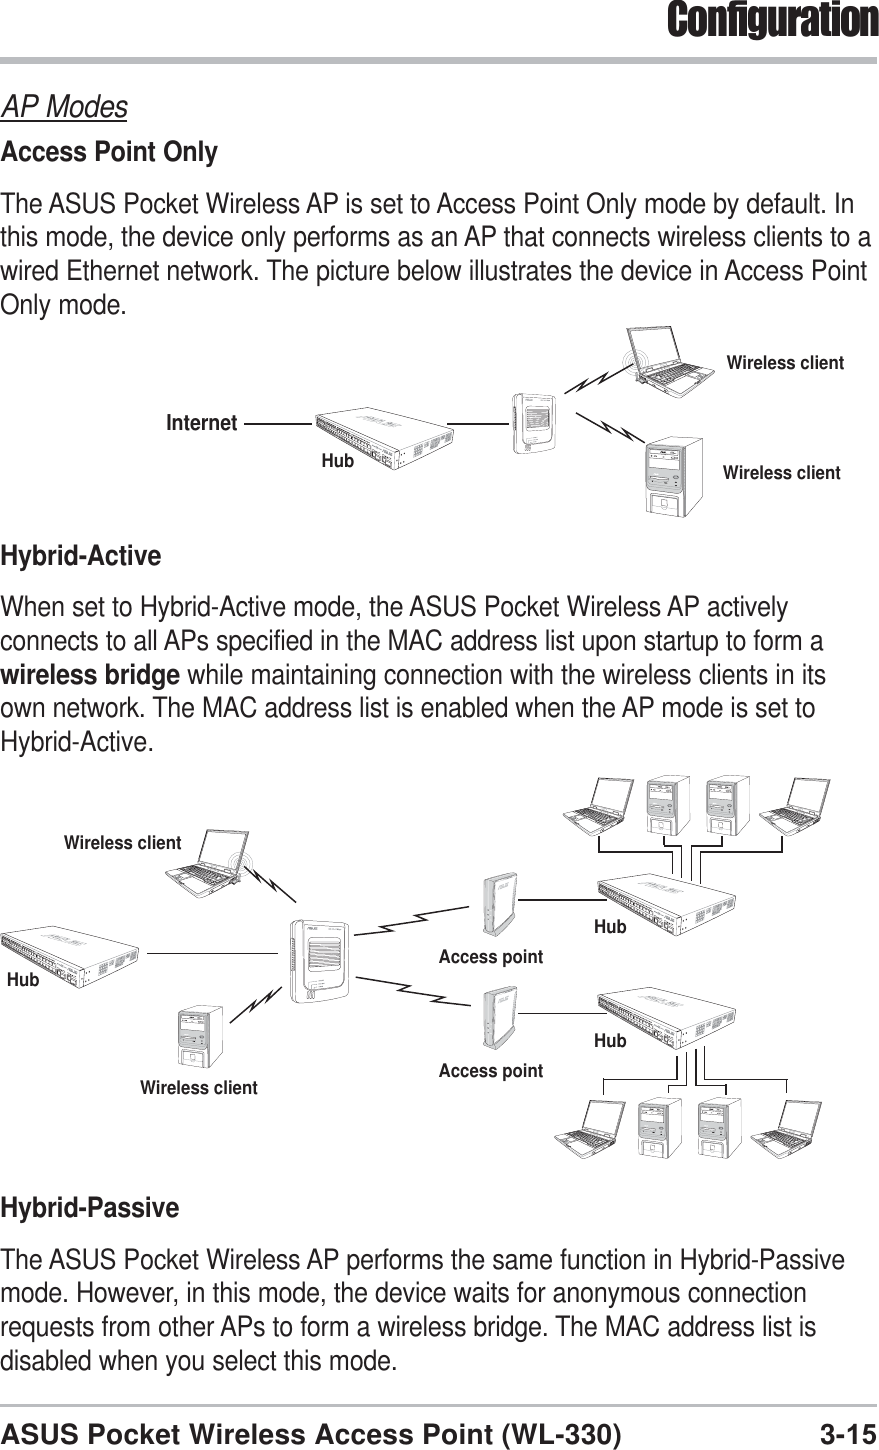 3-15ASUS Pocket Wireless Access Point (WL-330)ConfigurationAP ModesAccess Point OnlyThe ASUS Pocket Wireless AP is set to Access Point Only mode by default. Inthis mode, the device only performs as an AP that connects wireless clients to awired Ethernet network. The picture below illustrates the device in Access PointOnly mode.Hybrid-ActiveWhen set to Hybrid-Active mode, the ASUS Pocket Wireless AP activelyconnects to all APs specified in the MAC address list upon startup to form awireless bridge while maintaining connection with the wireless clients in itsown network. The MAC address list is enabled when the AP mode is set toHybrid-Active.HubInternetWireless clientWireless clientHybrid-PassiveThe ASUS Pocket Wireless AP performs the same function in Hybrid-Passivemode. However, in this mode, the device waits for anonymous connectionrequests from other APs to form a wireless bridge. The MAC address list isdisabled when you select this mode.HubAccess pointHubAccess pointHubWireless clientWireless client